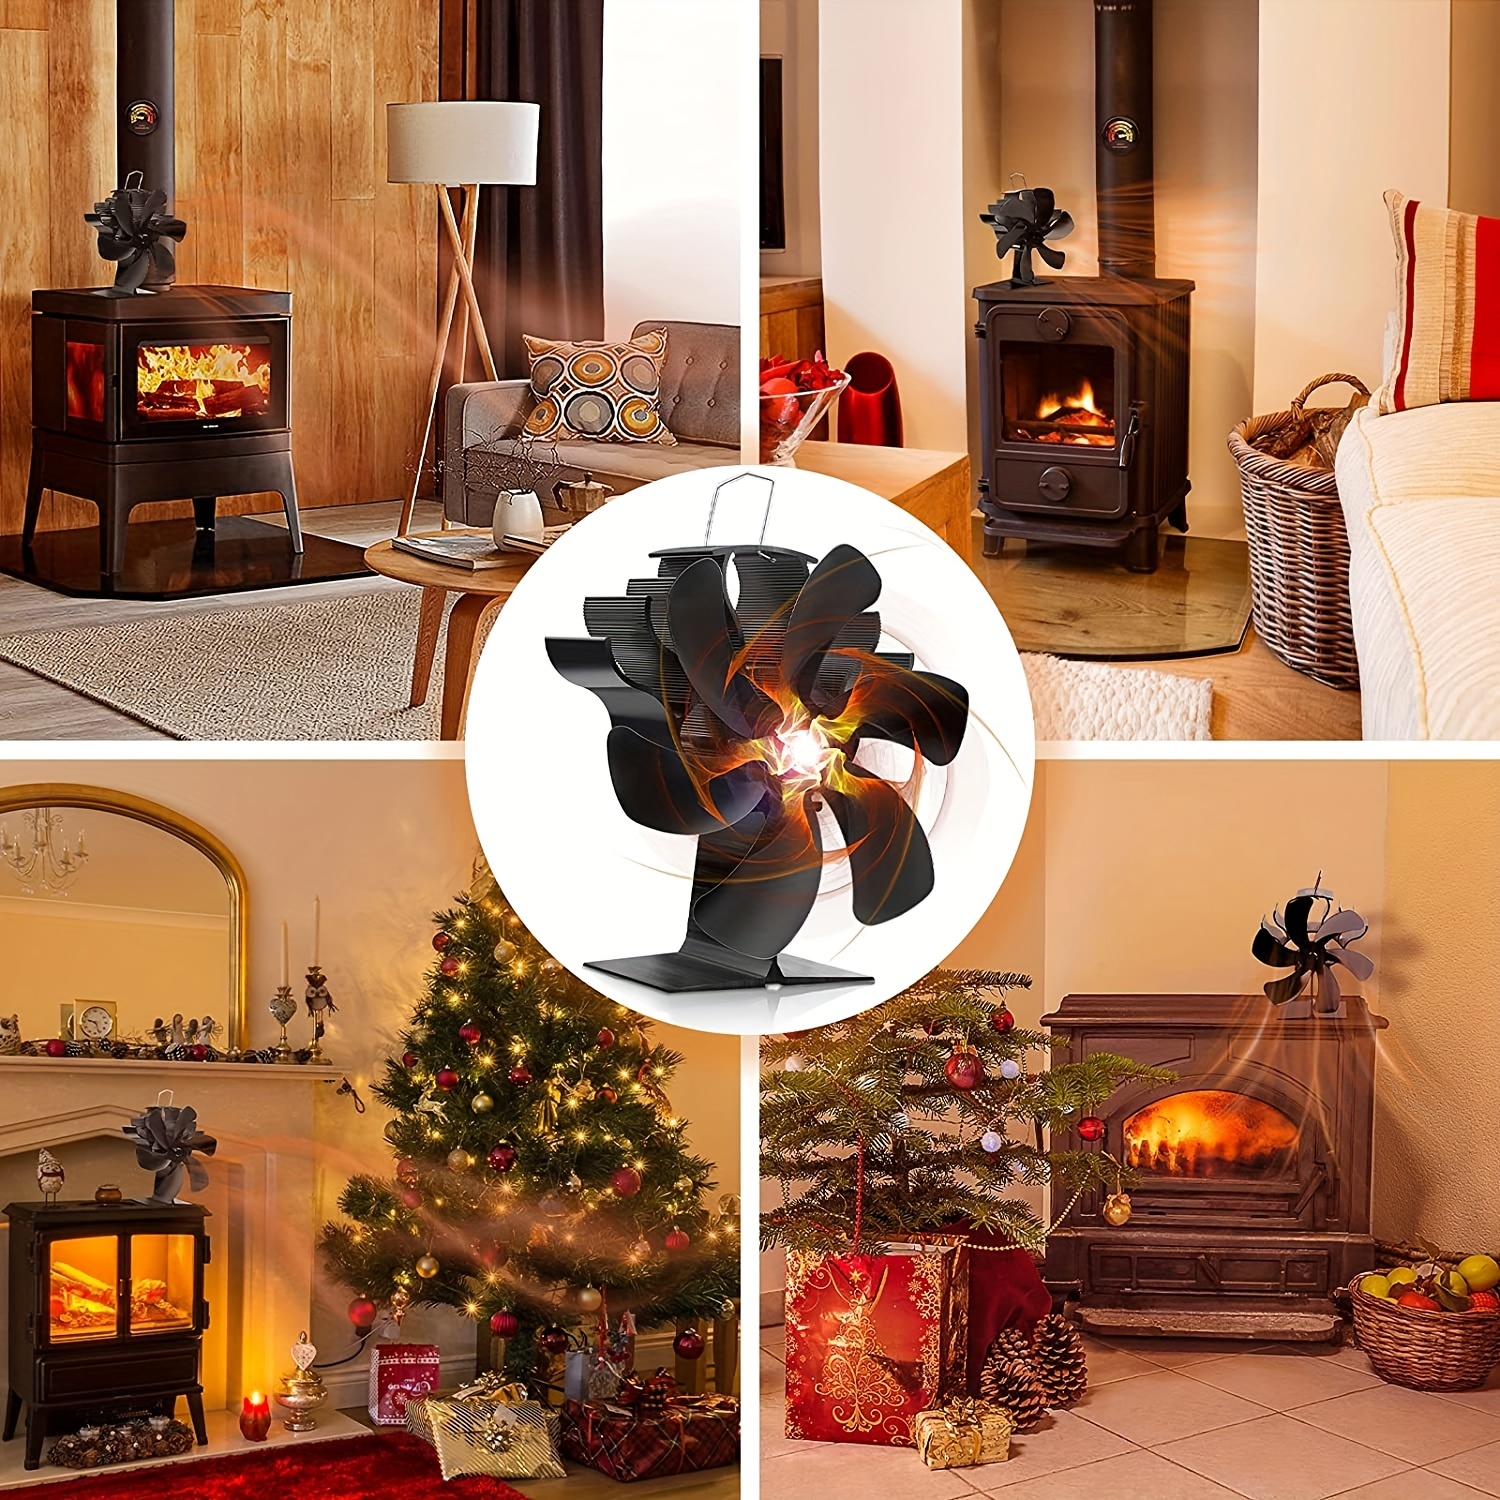  8 Blades Heat Powered Stove Fan - Wood Burning Stove Fireplace  Fan Circulates Warm/Heated Air Eco Stove Fan for Gas/Pellet/Wood/Log Stoves  with Thermometer : Home & Kitchen